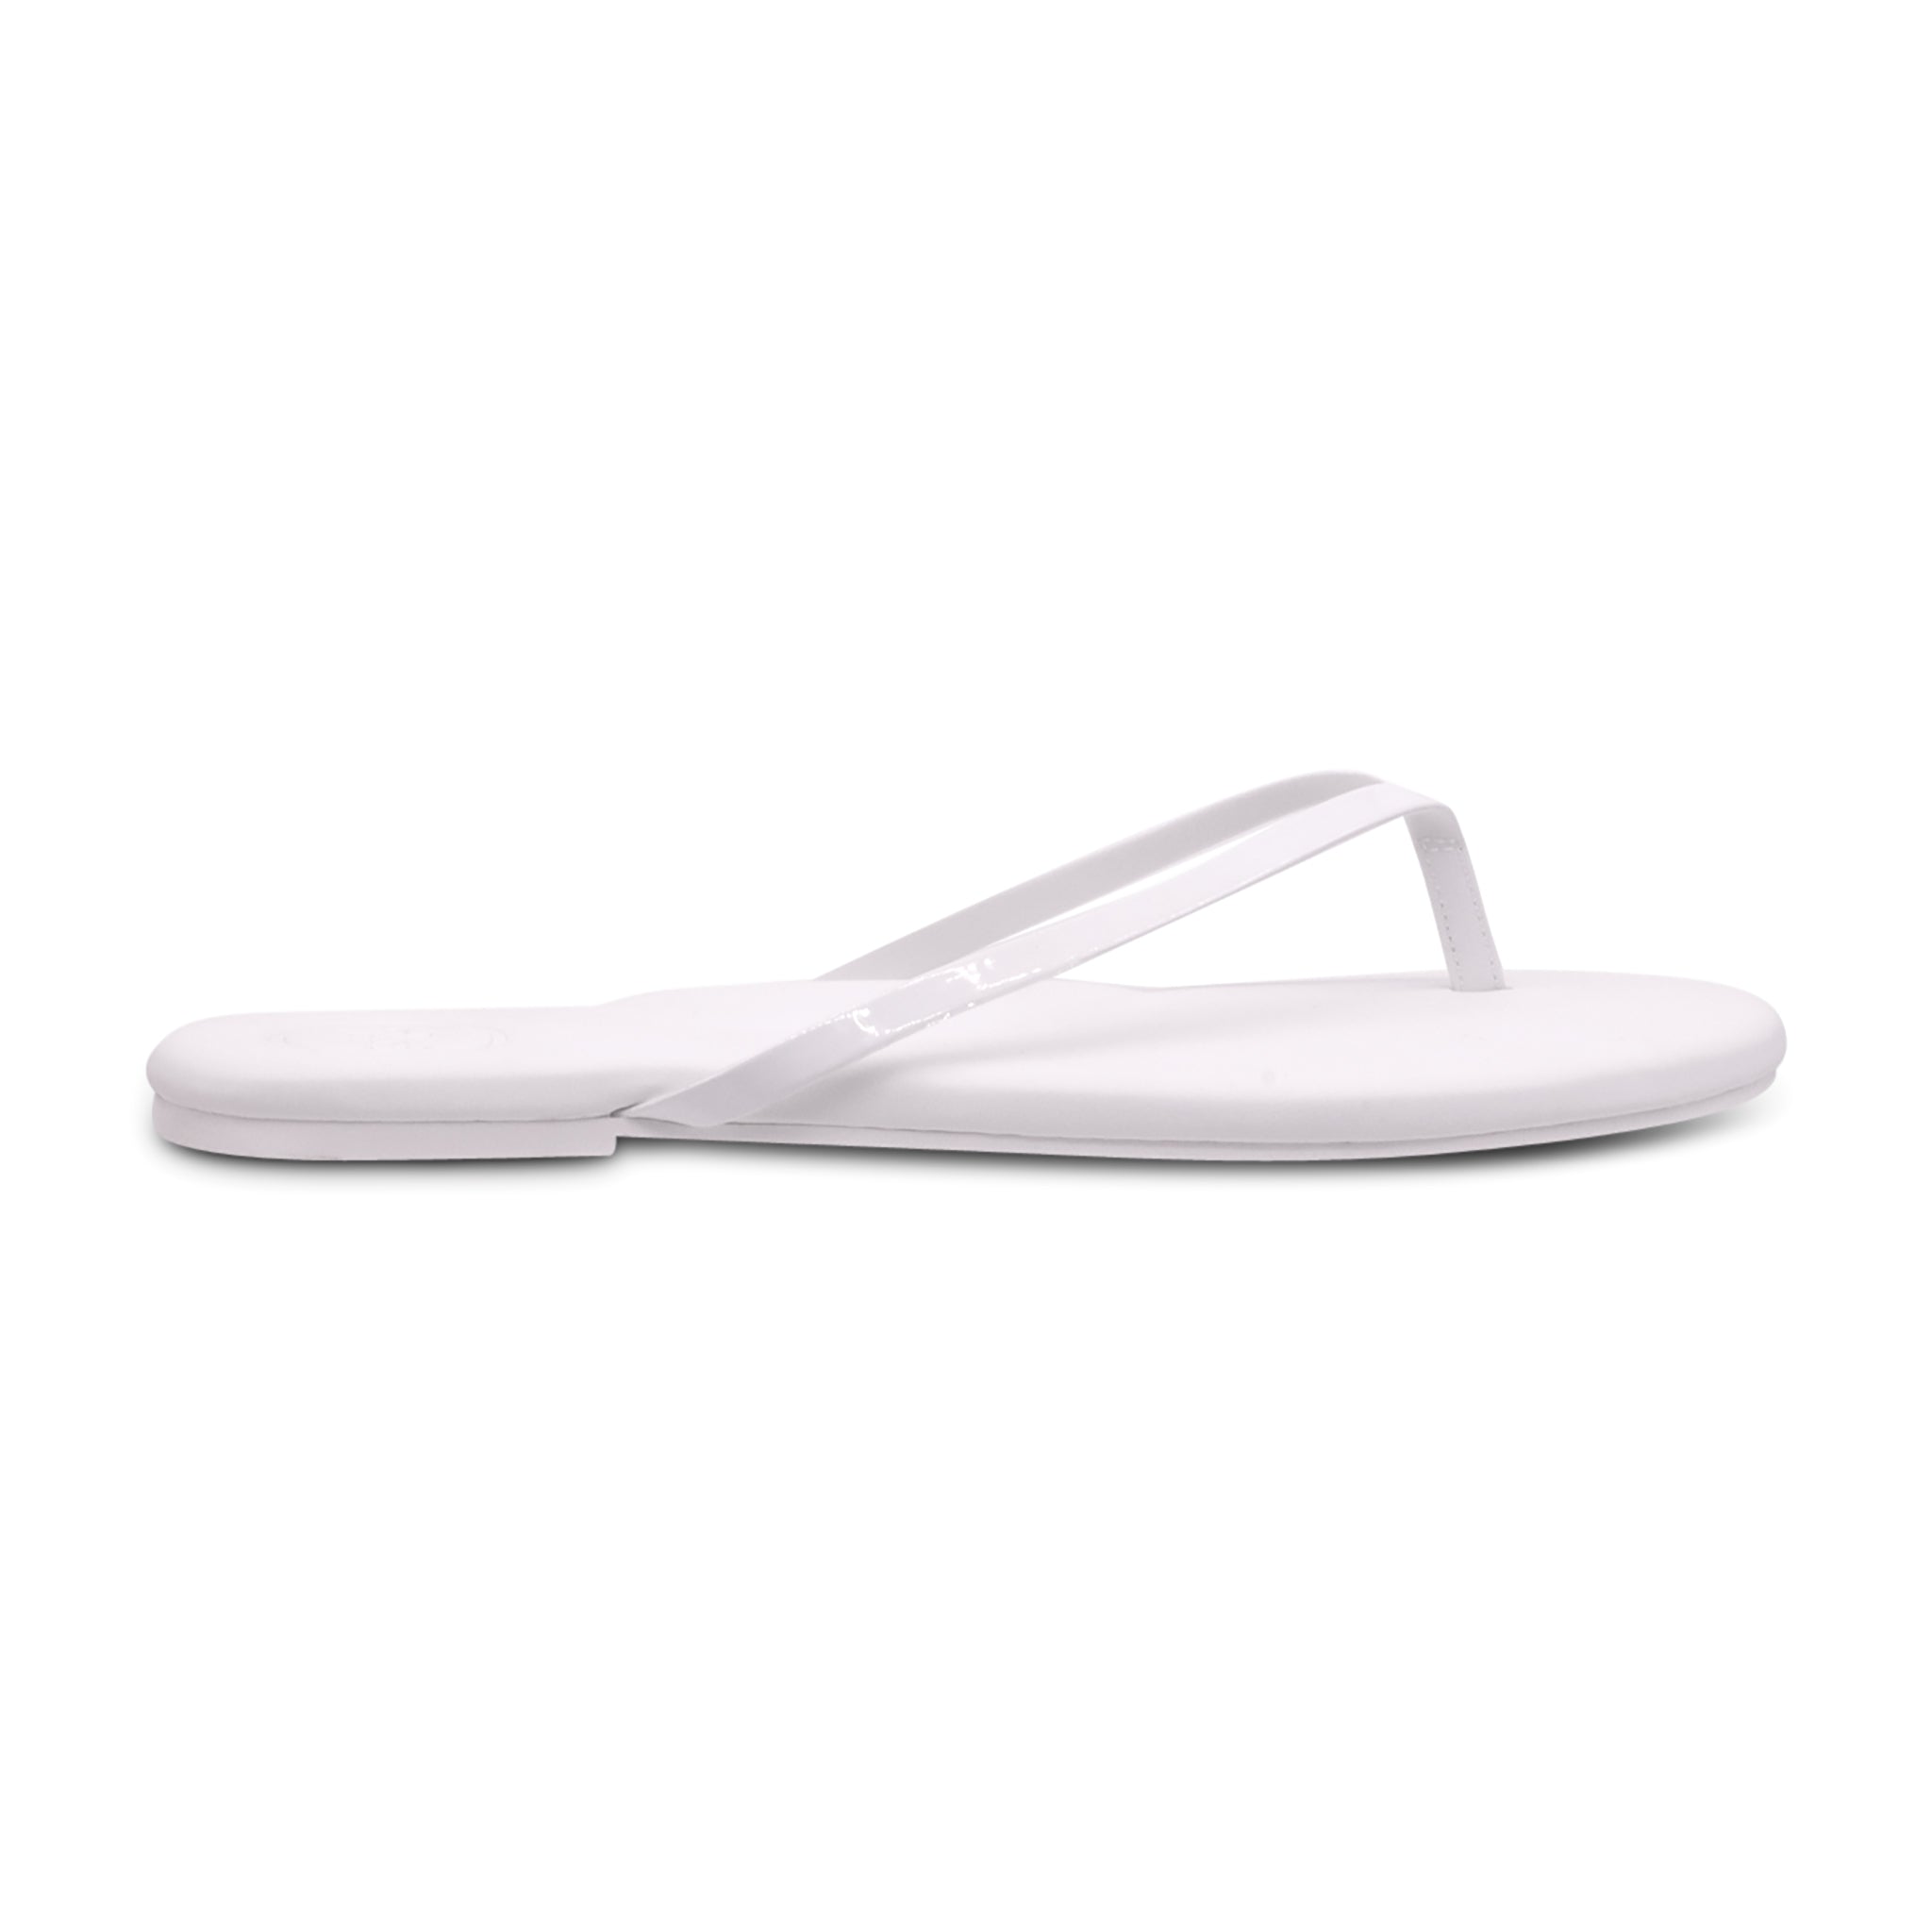 Indie White with White Patent Strap Sandal